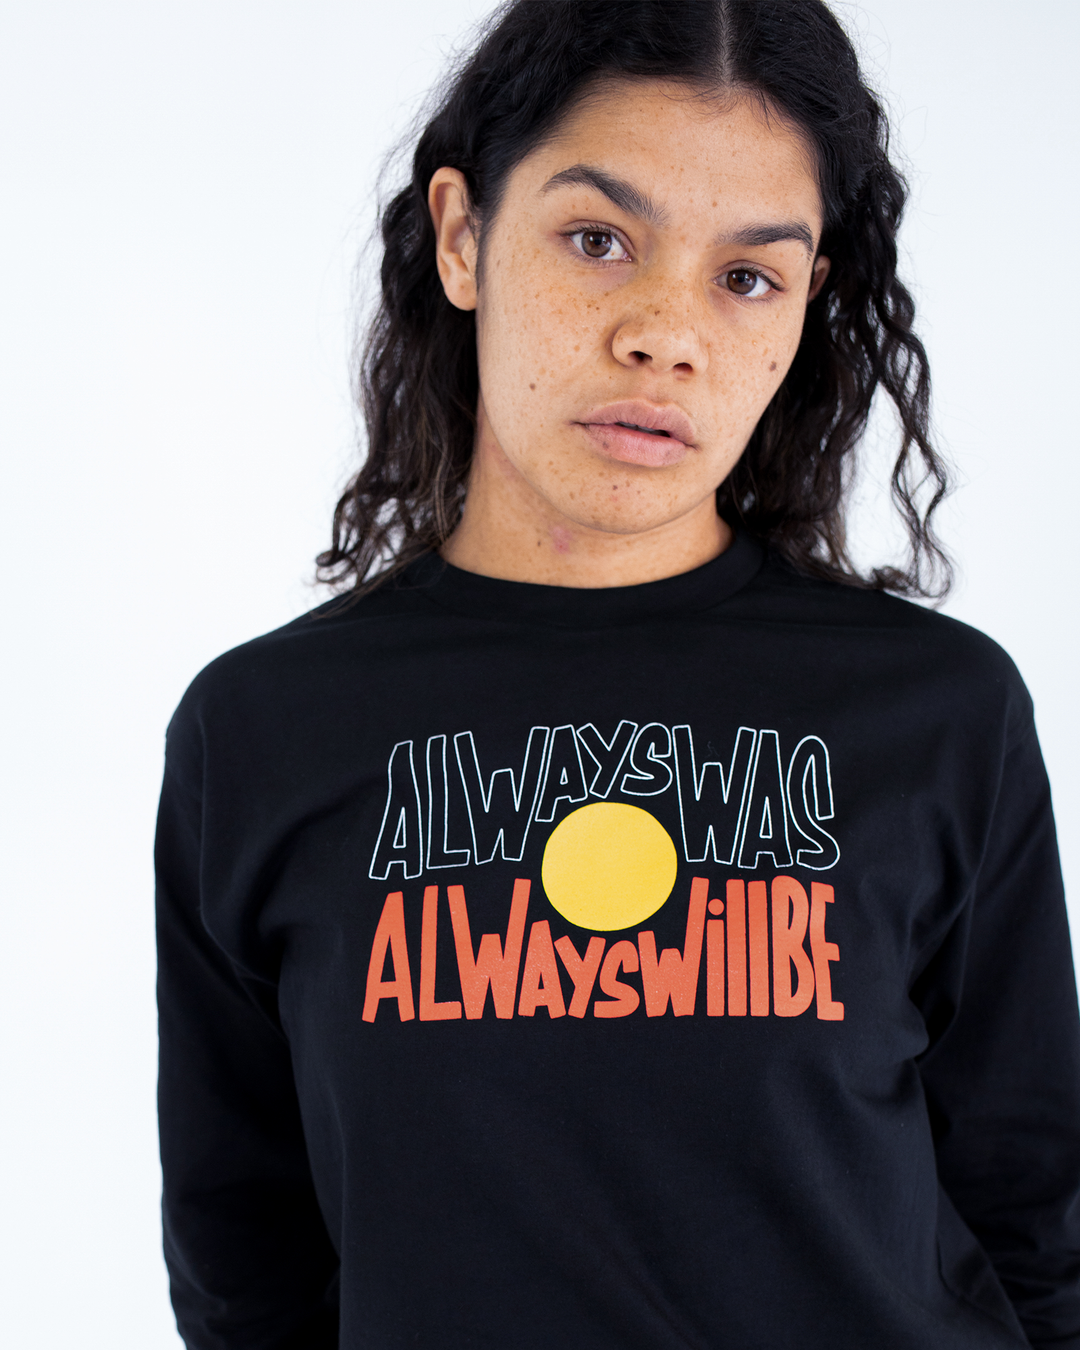 Clothing The Gaps. Black long sleeve T-shirt with Black, yellow and red 'always was always will be' text screen printed in centre.